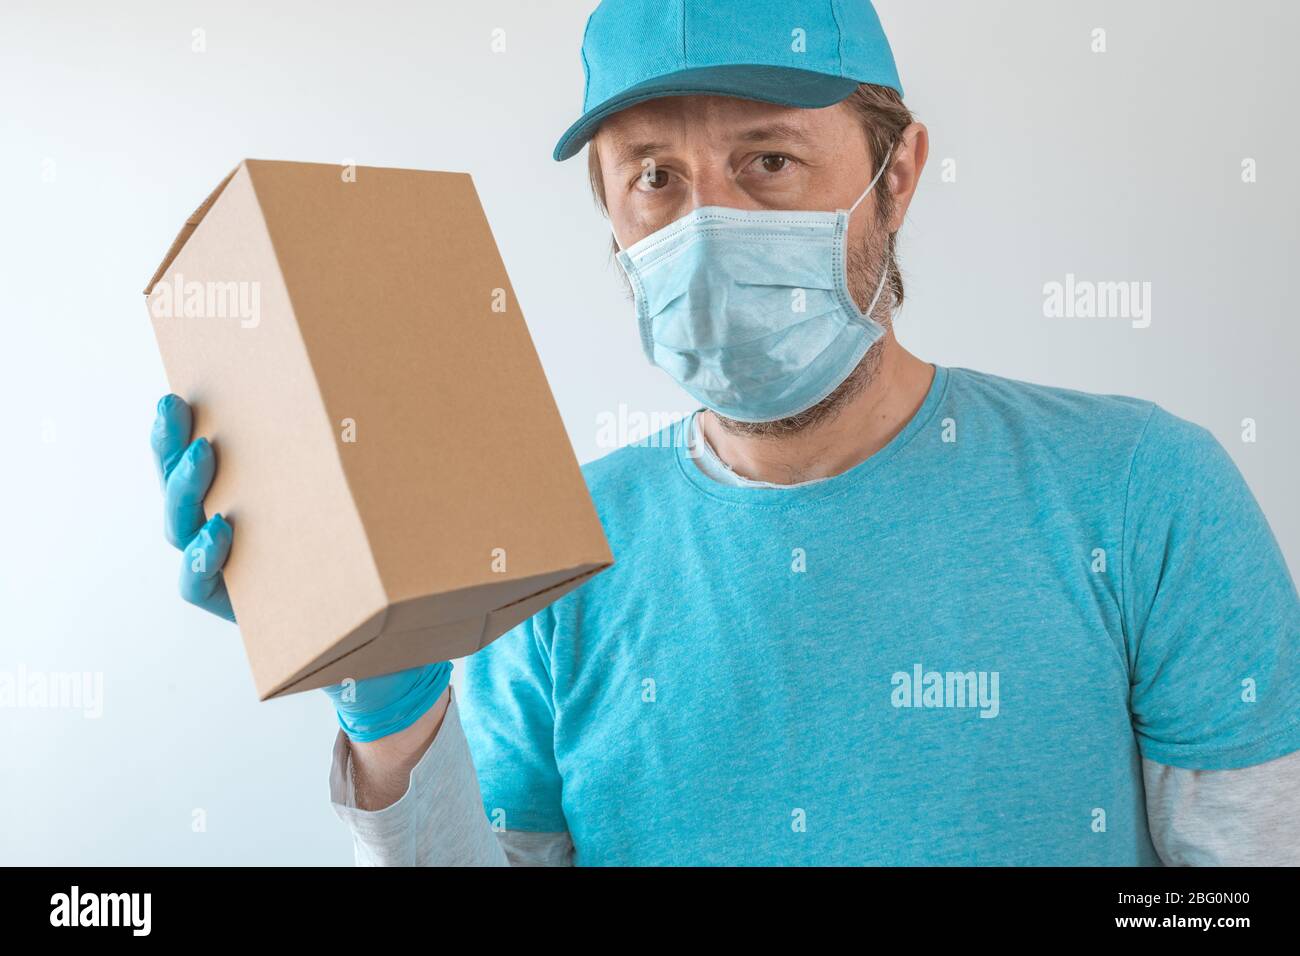 Delivery man posing with parcel package in protective clothing wearing baseball cap, protective mask and gloves during viral infection pandemic outbre Stock Photo